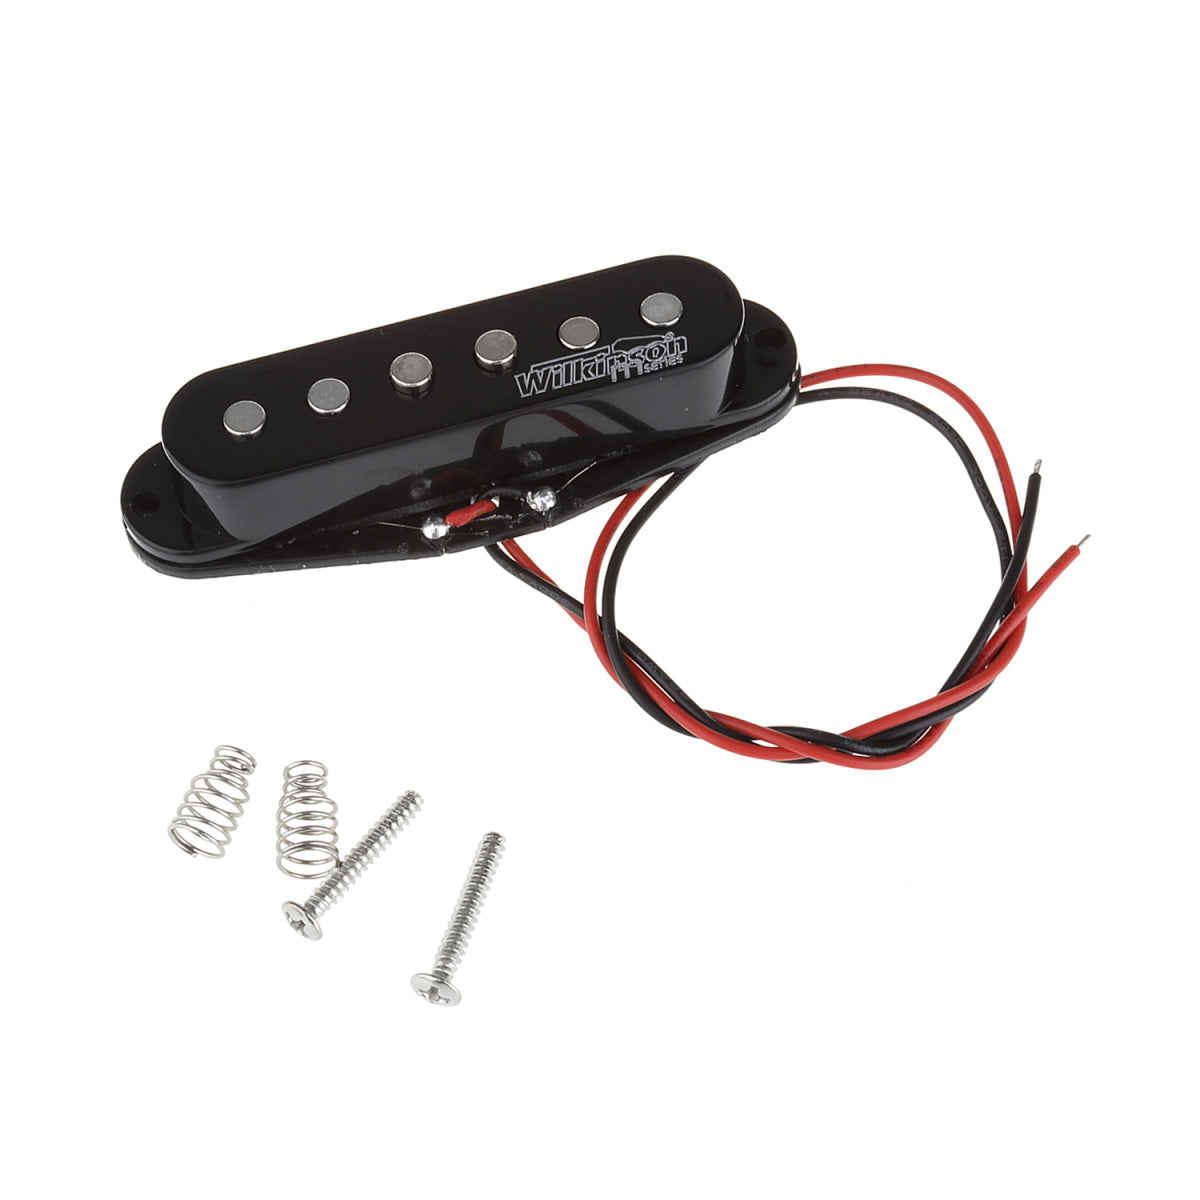 Wilkinson LOW GAUSS Vintage Tone Ceramic Single Coil Pickup for Strat Style Guitar Middle, Black